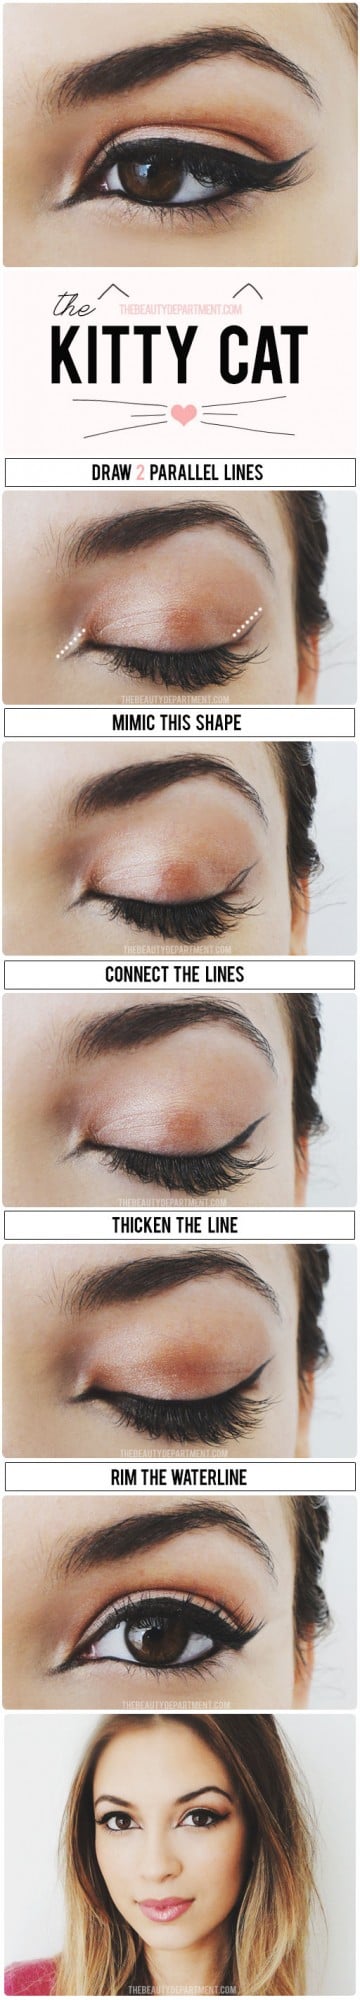 17 Amazing Makeup Ideas and Tutorials for Dramatic Look (12)